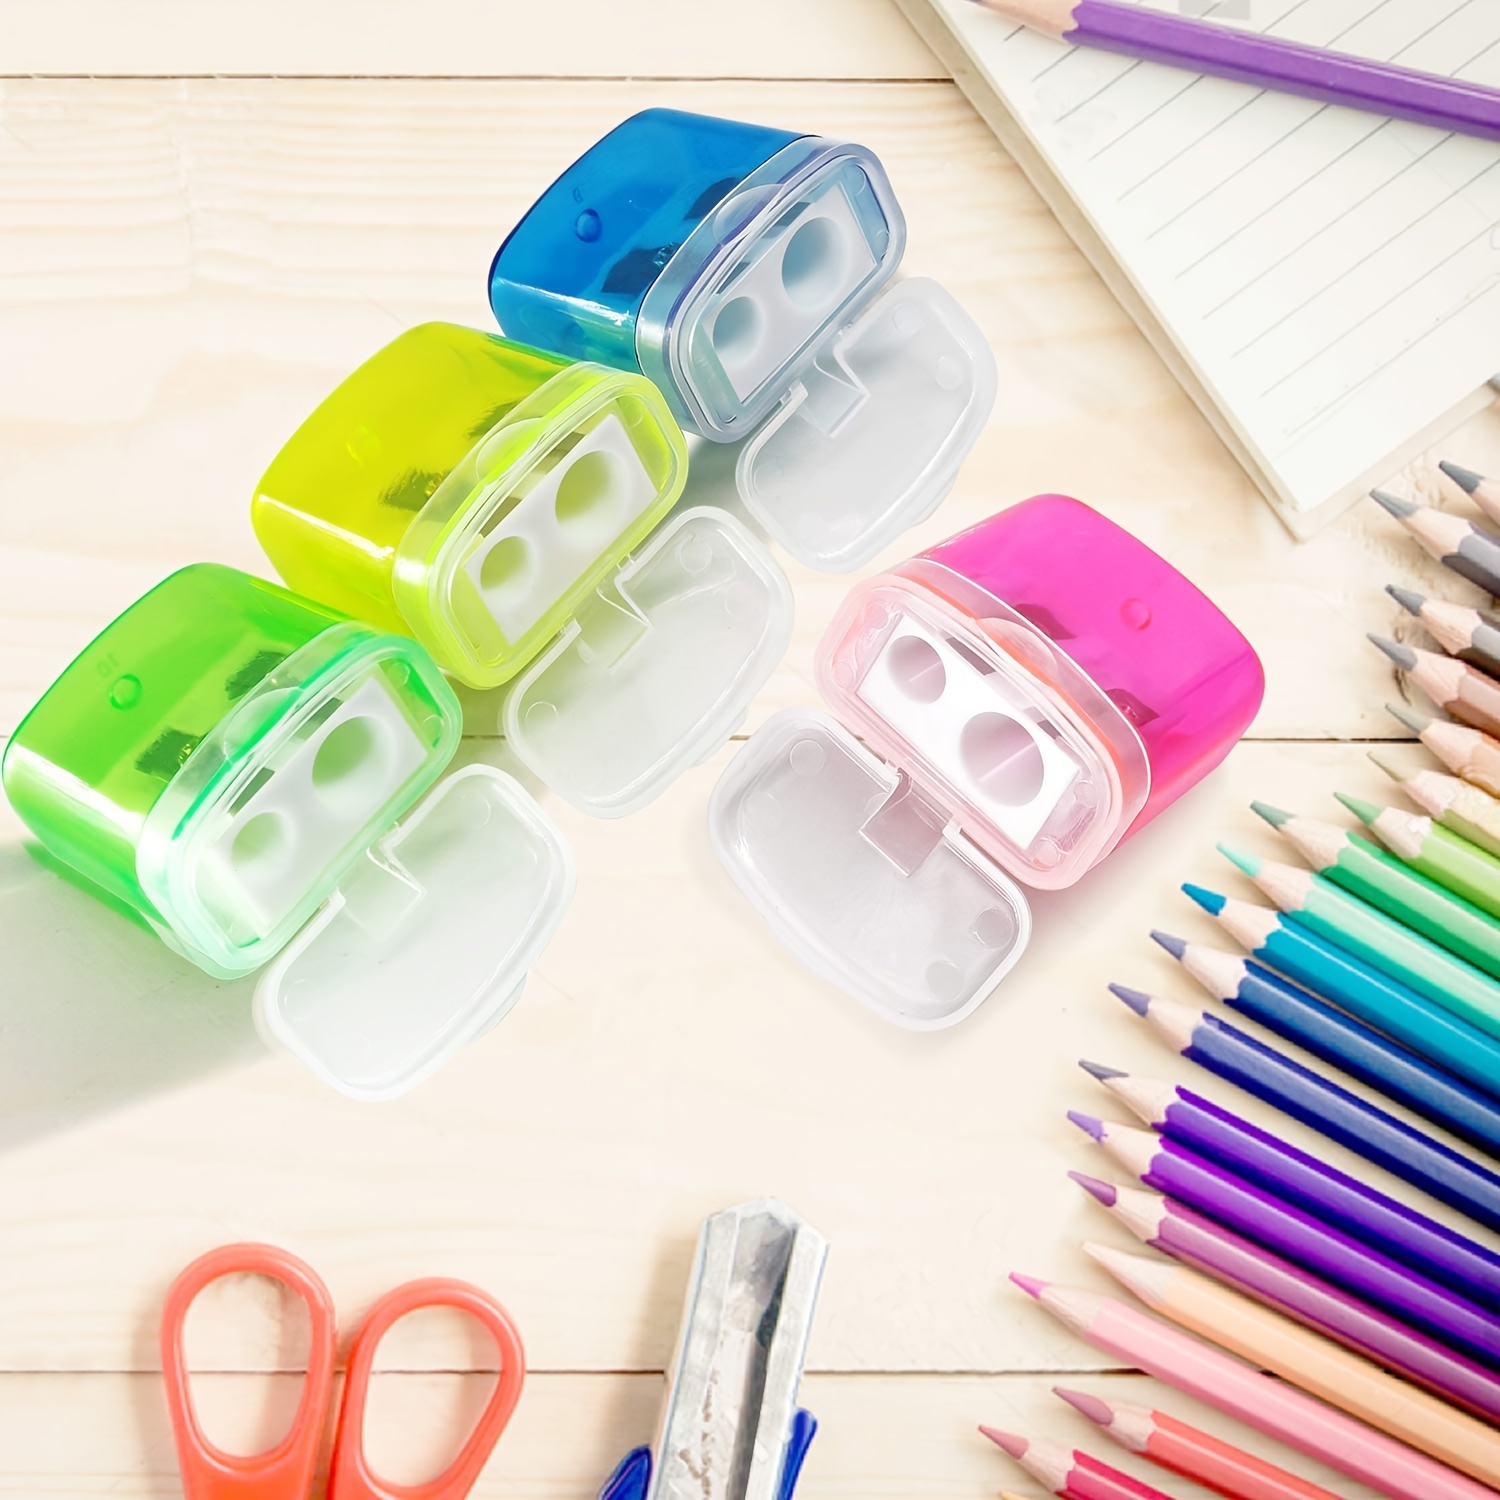 4pcs Manual Pencil Sharpeners - Colorful & Compact - Shop Office Supplies at Our Store